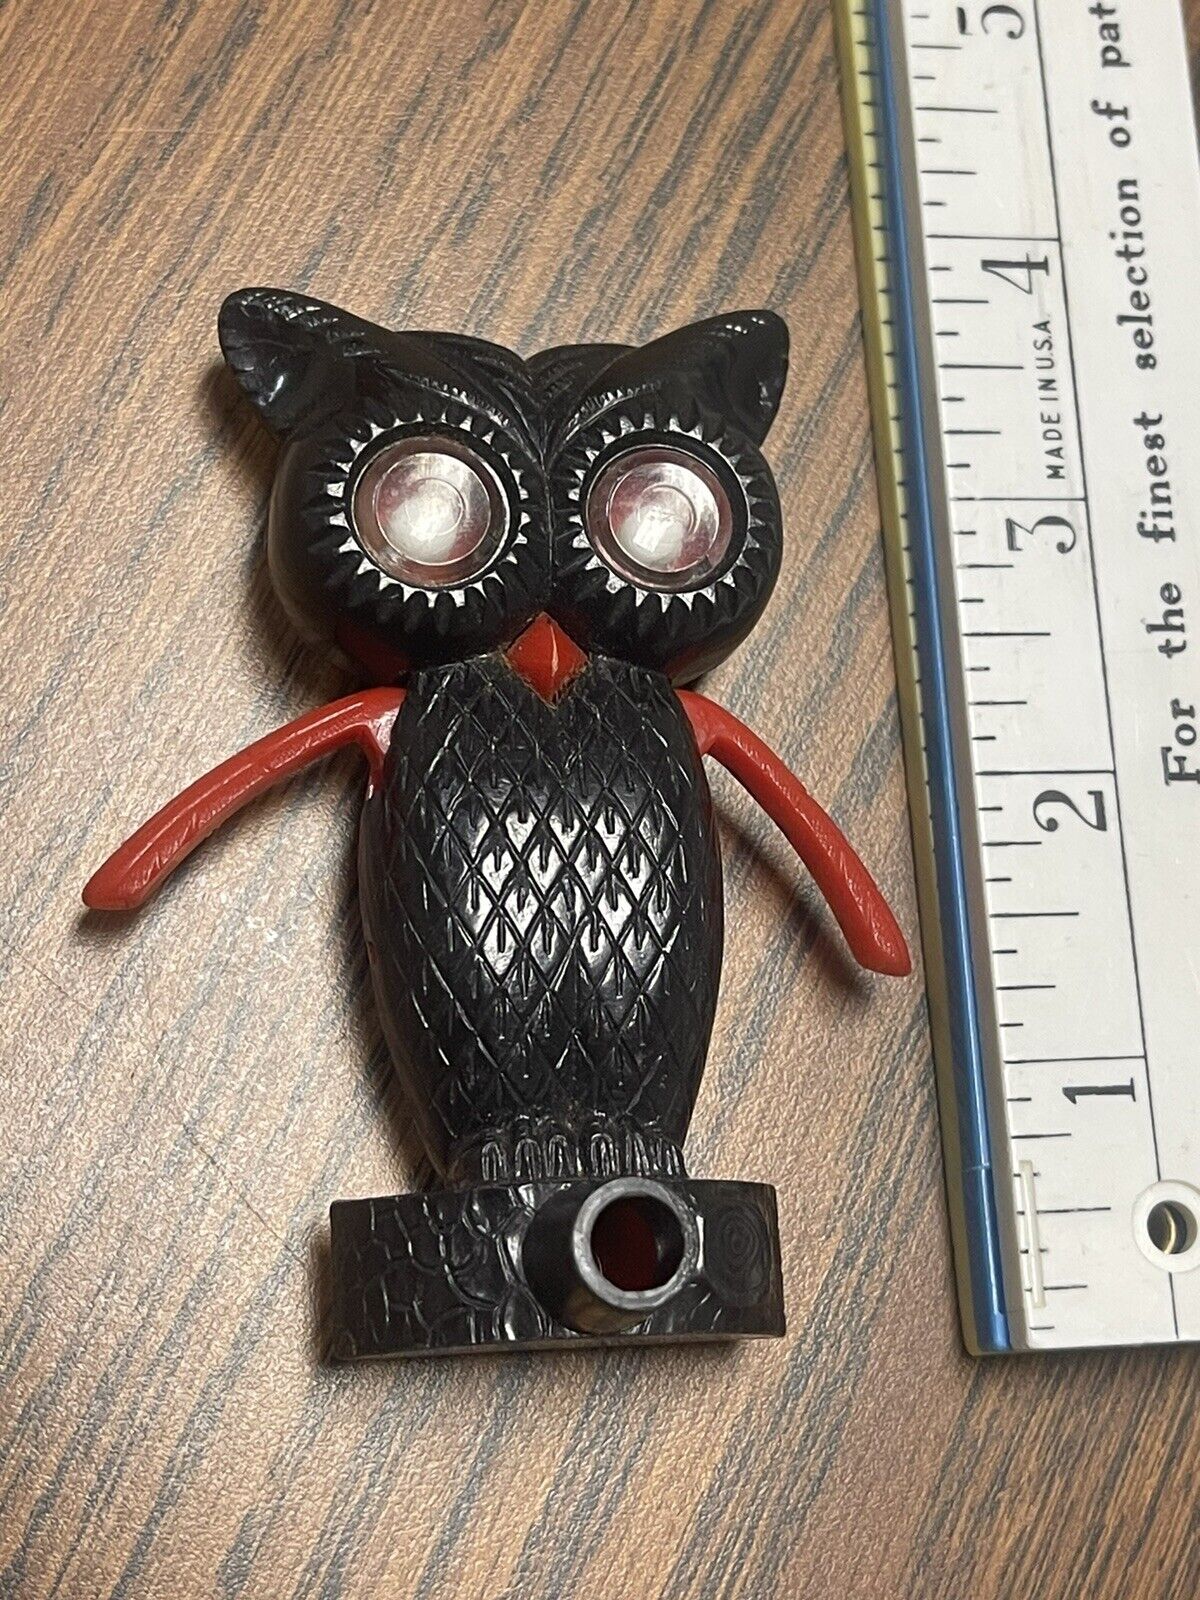 Owl Whistle Old Vintage Halloween Noisemaker Toy Moving Eyes Wings Rare Awesome